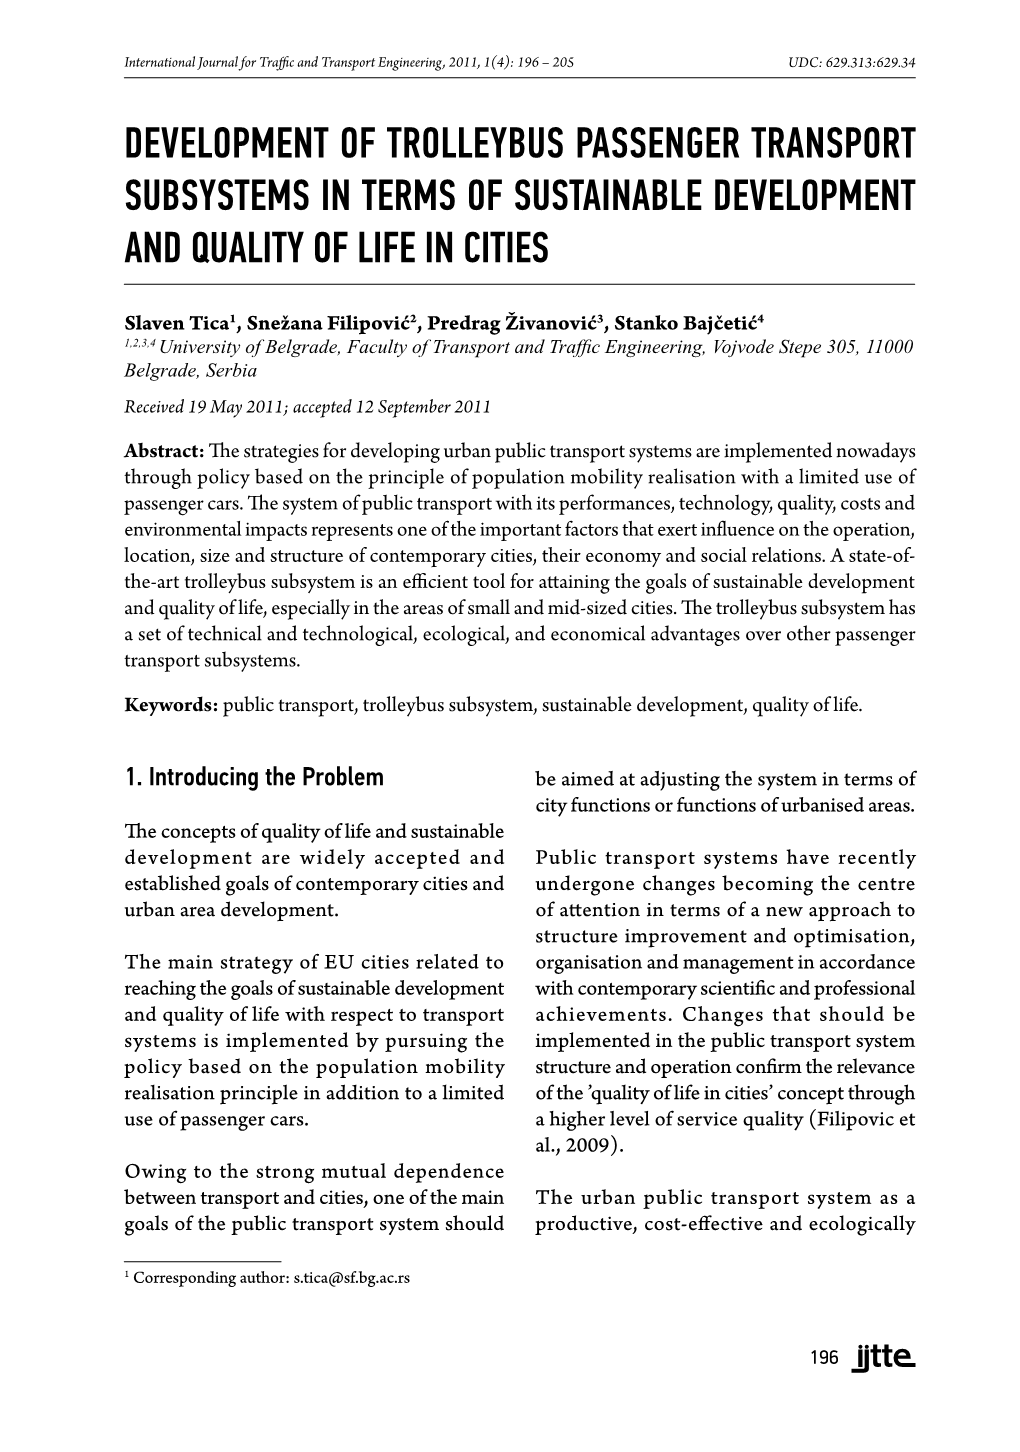 Development of Trolleybus Passenger Transport Subsystems in Terms of Sustainable Development and Quality of Life in Cities